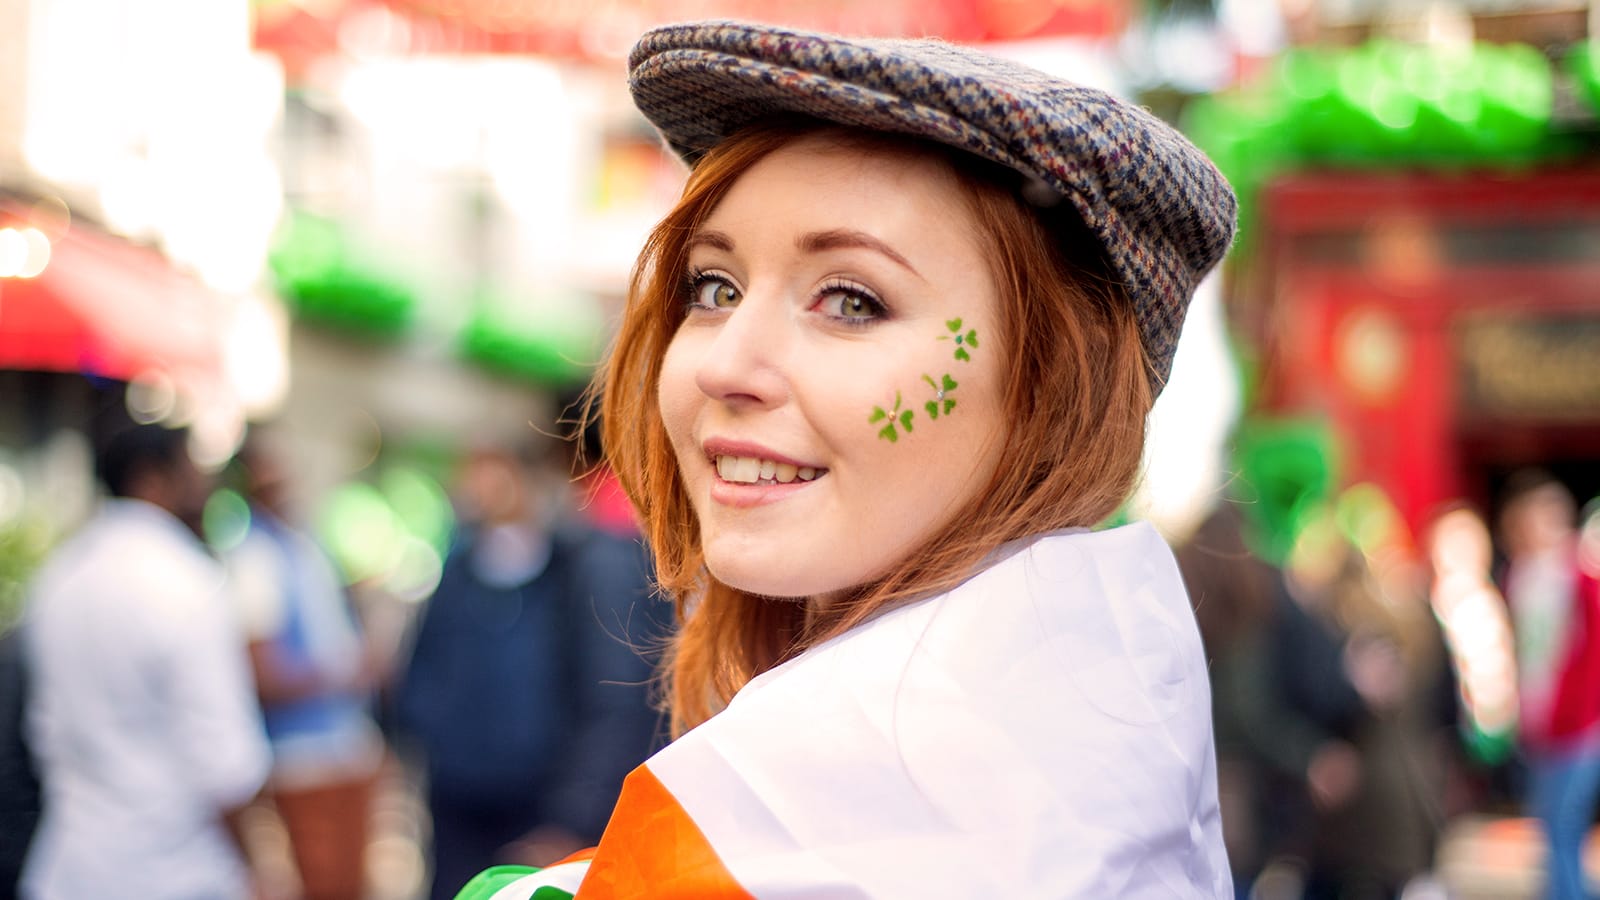 st. patrick's day traditions you should join